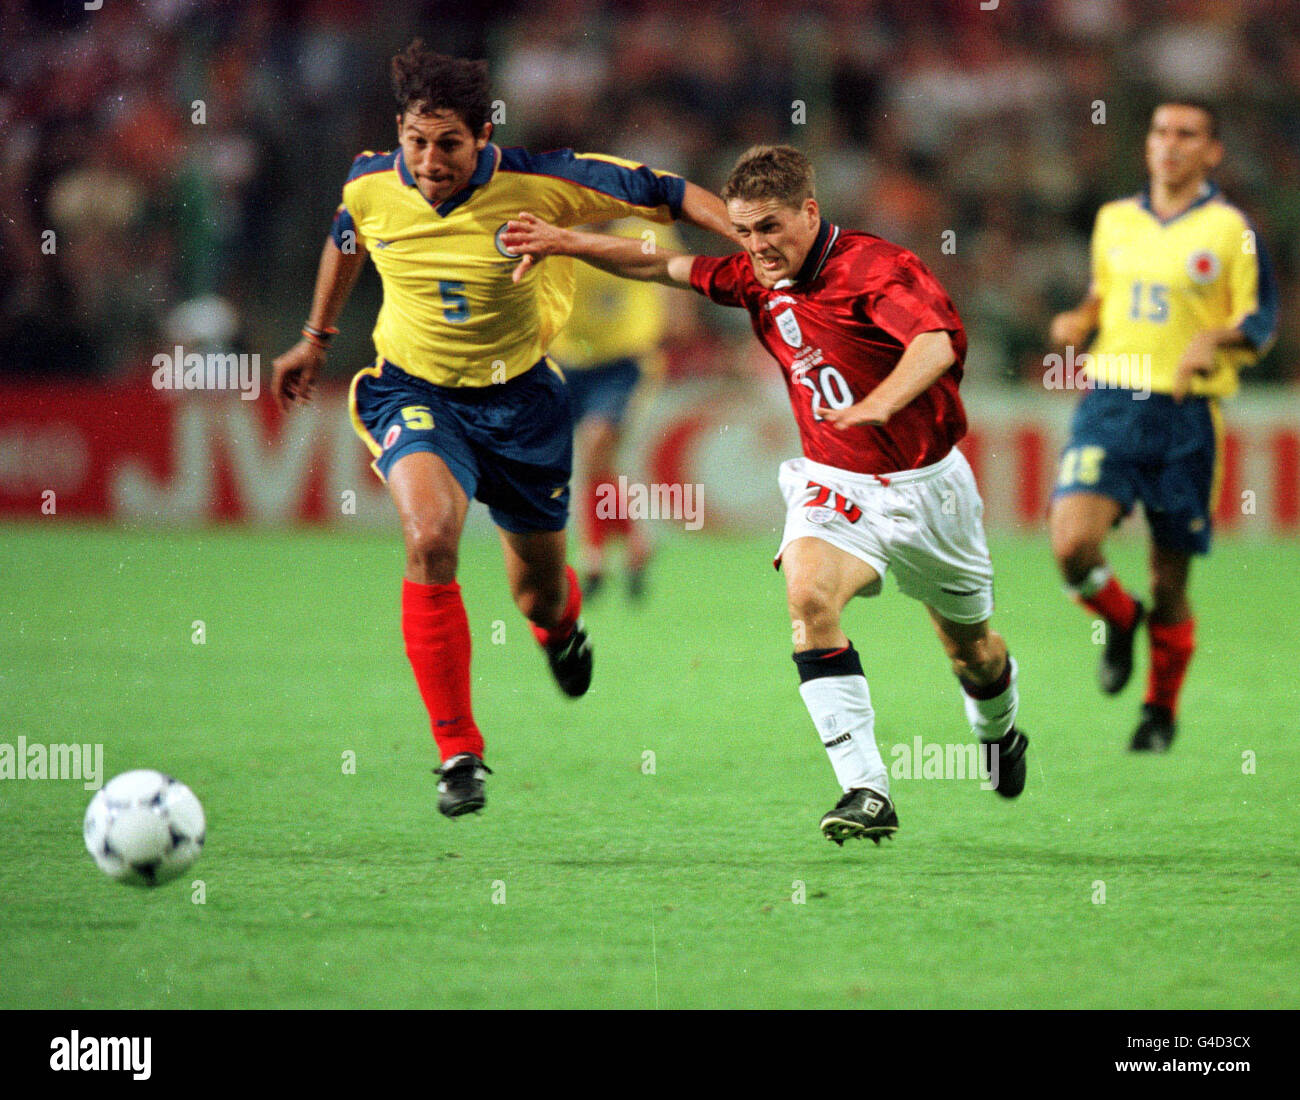 PA NEWS 27/6/98 ENGLAND STRIKER MICHAEL OWEN AND COLOMBIAN DEFENDER IVAN RAMIRO CORDOBA IN ACTION DURING THEIR FINAL GROUP MATCH OF THE 1998 WORLD CUP, IN LENS, FRANCE. ENGLAND WON THE MATCH 2-0 TO QUALIFY FOR THE SECOND ROUND OF THE COMPETITION, WHERE THEY FACE ARGENTINA. Stock Photo